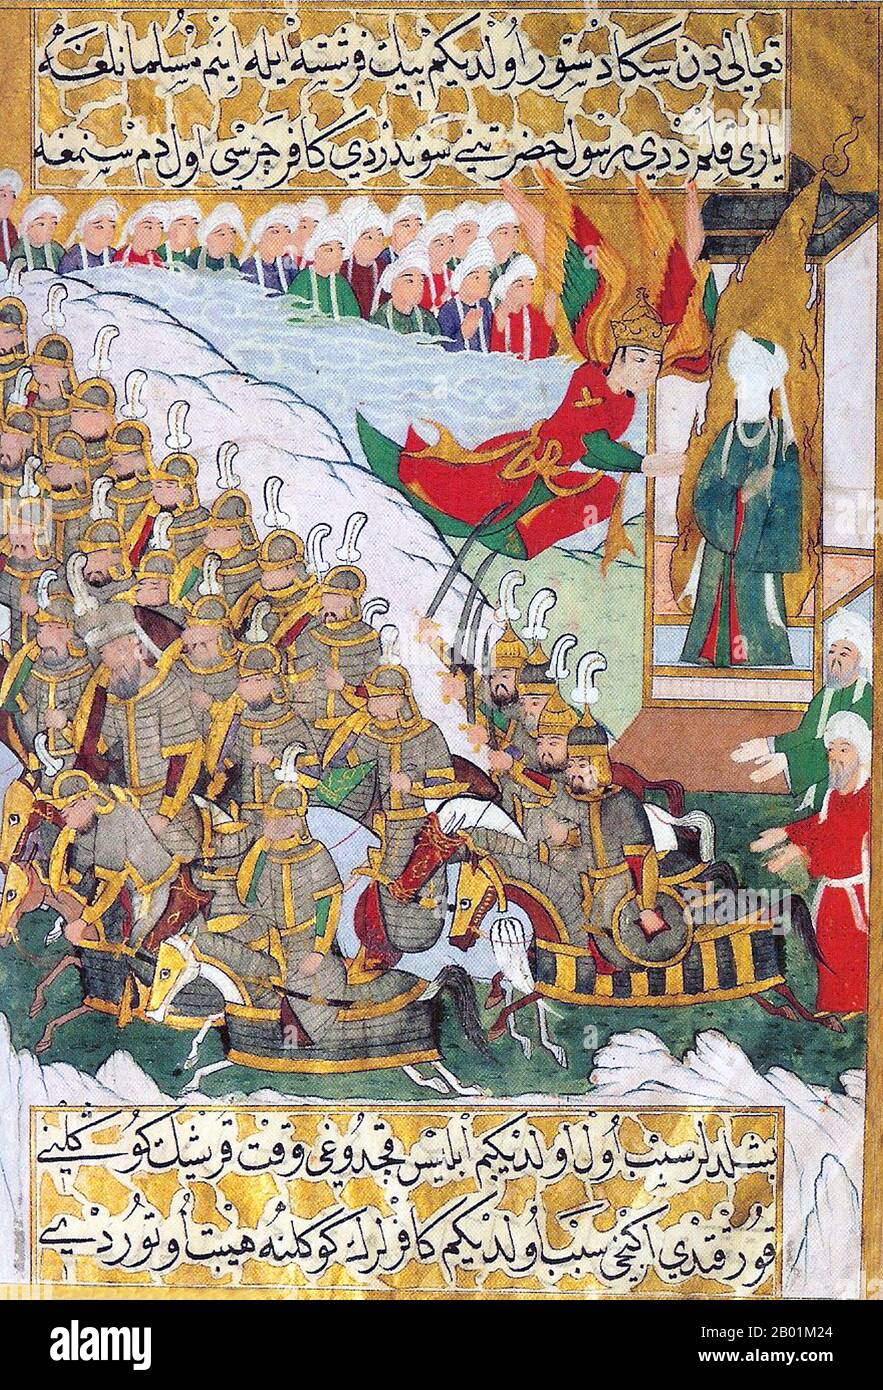 Turkey: 'The Battle of Badr'. Miniature painting by Lütfi Abdullah from the Siyer-I Nebi (Life of the Prophet), c. 1594.  The Battle of Badr, fought Saturday, 13 March 624 CE in the Hejaz region of western Arabia (present-day Saudi Arabia), was a key battle in the early days of Islam and a turning point in Muhammad's struggle with his opponents among the Quraish in Mecca. The battle has been passed down in Islamic history as a decisive victory attributable to divine intervention, or by secular sources to the strategic genius of Muhammad. Stock Photo